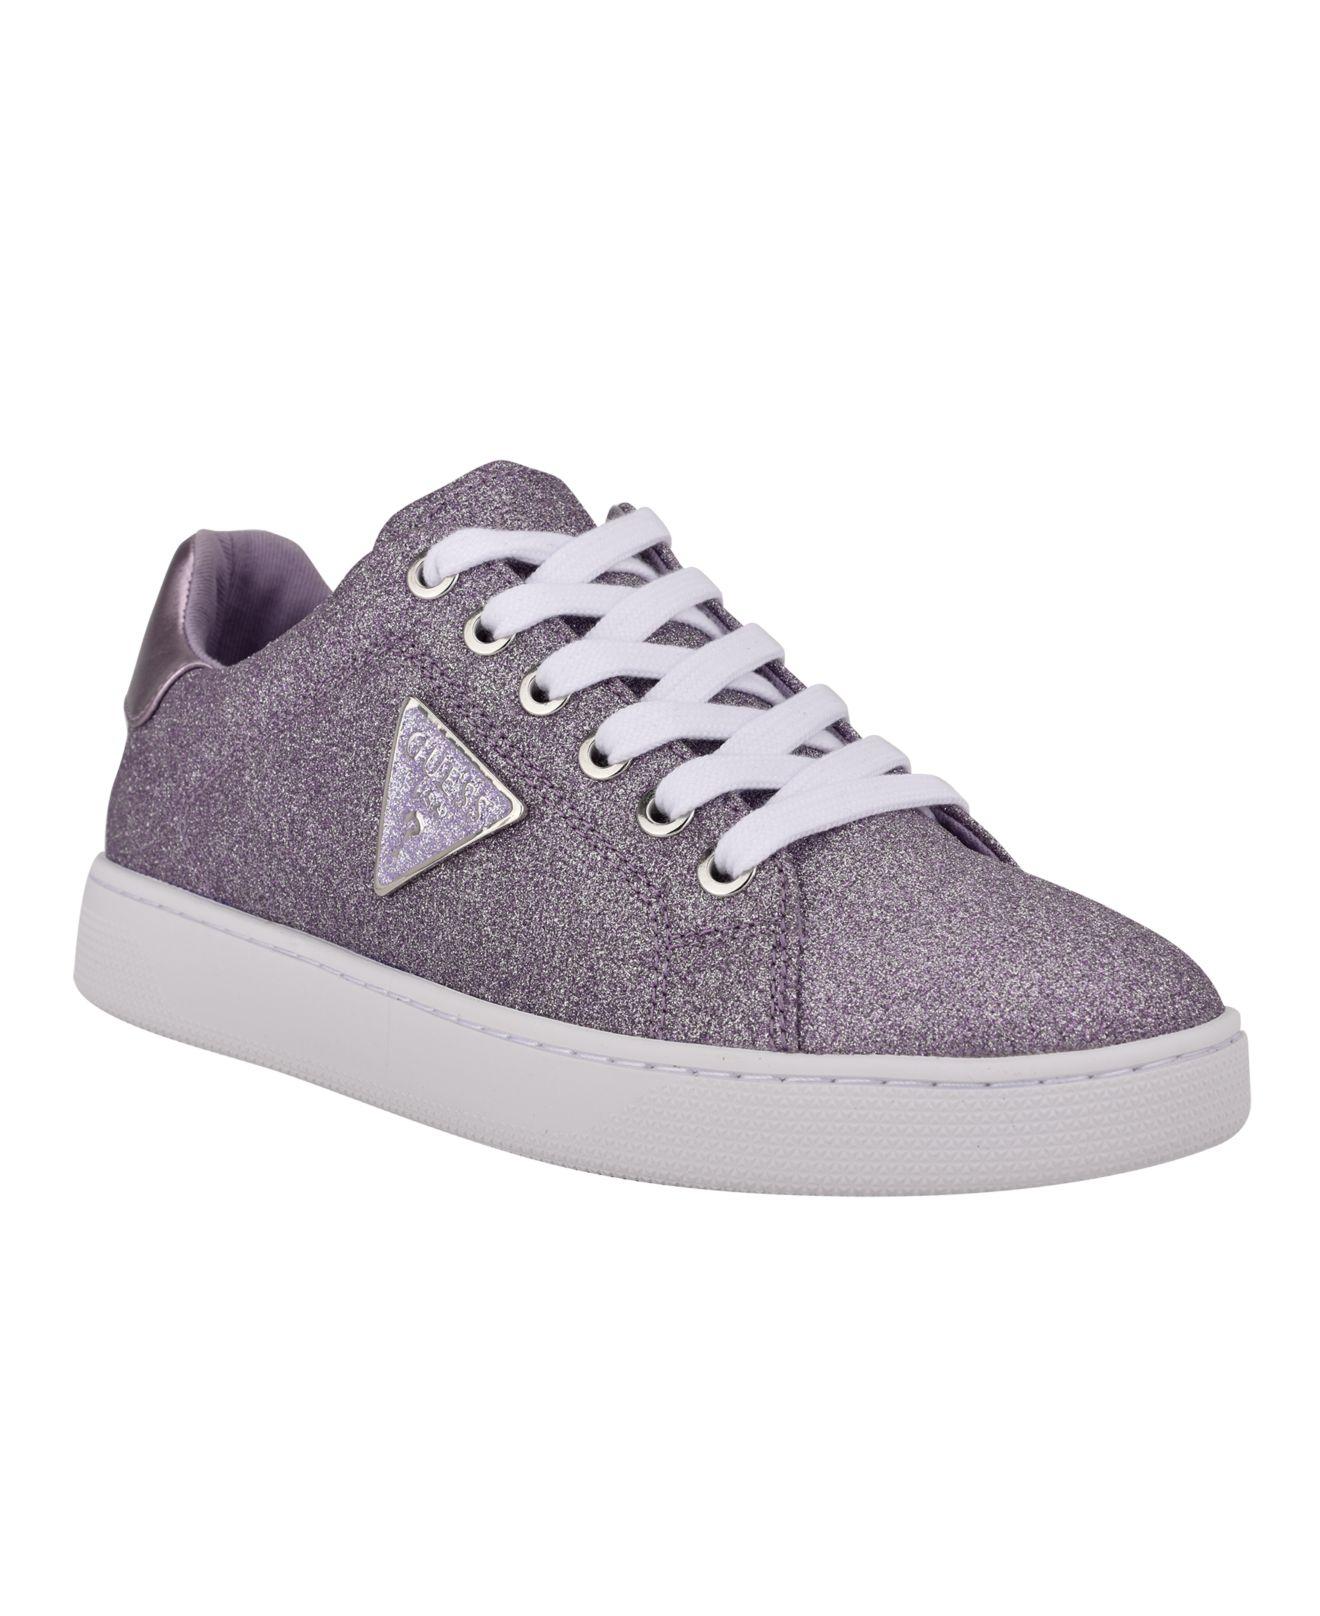 Guess Reshy Casual Sneakers in Purple | Lyst